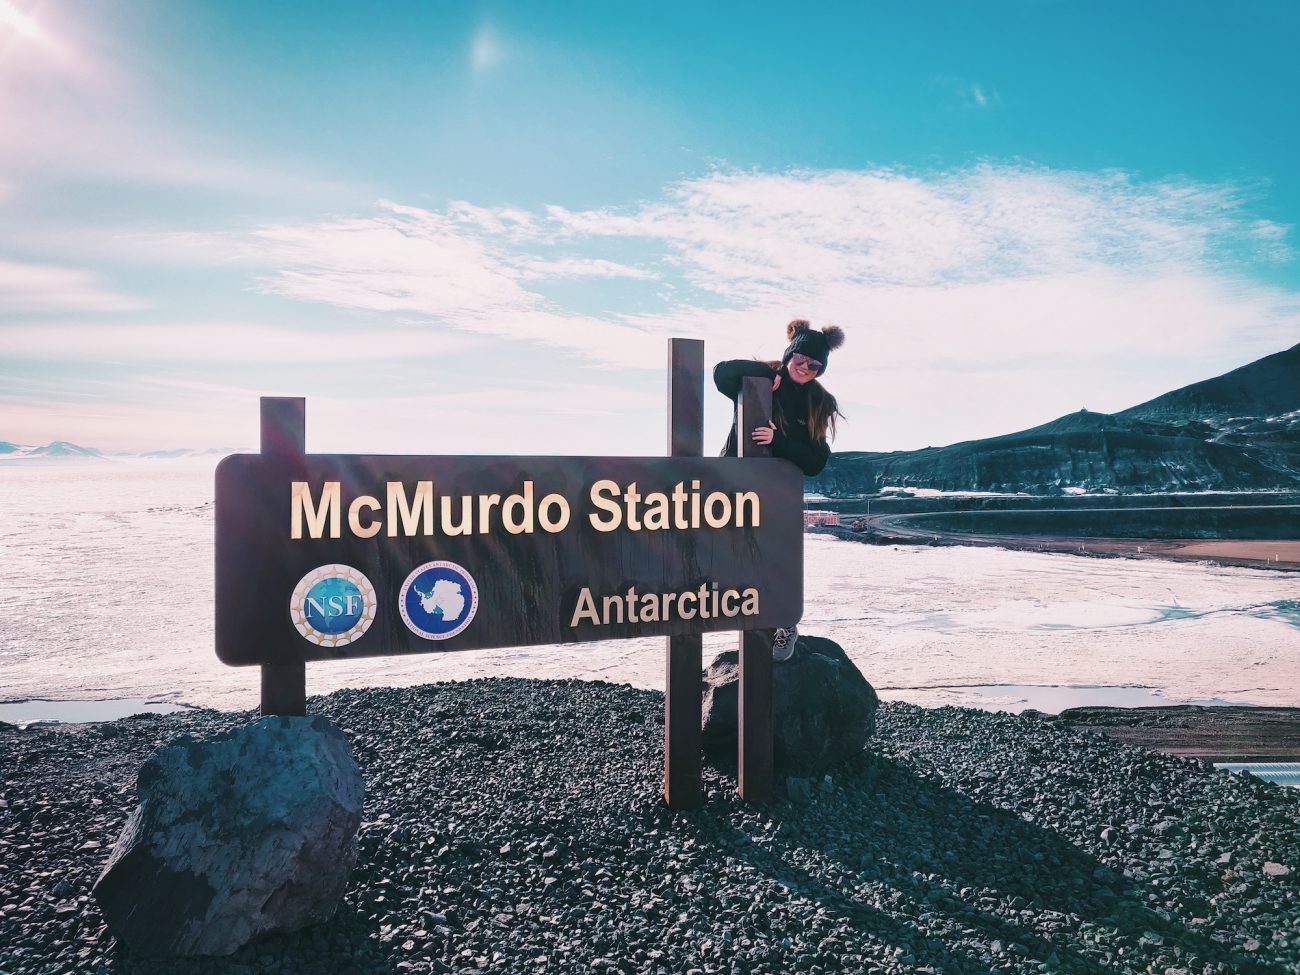 At the McMurdo Station sign in Antarctica